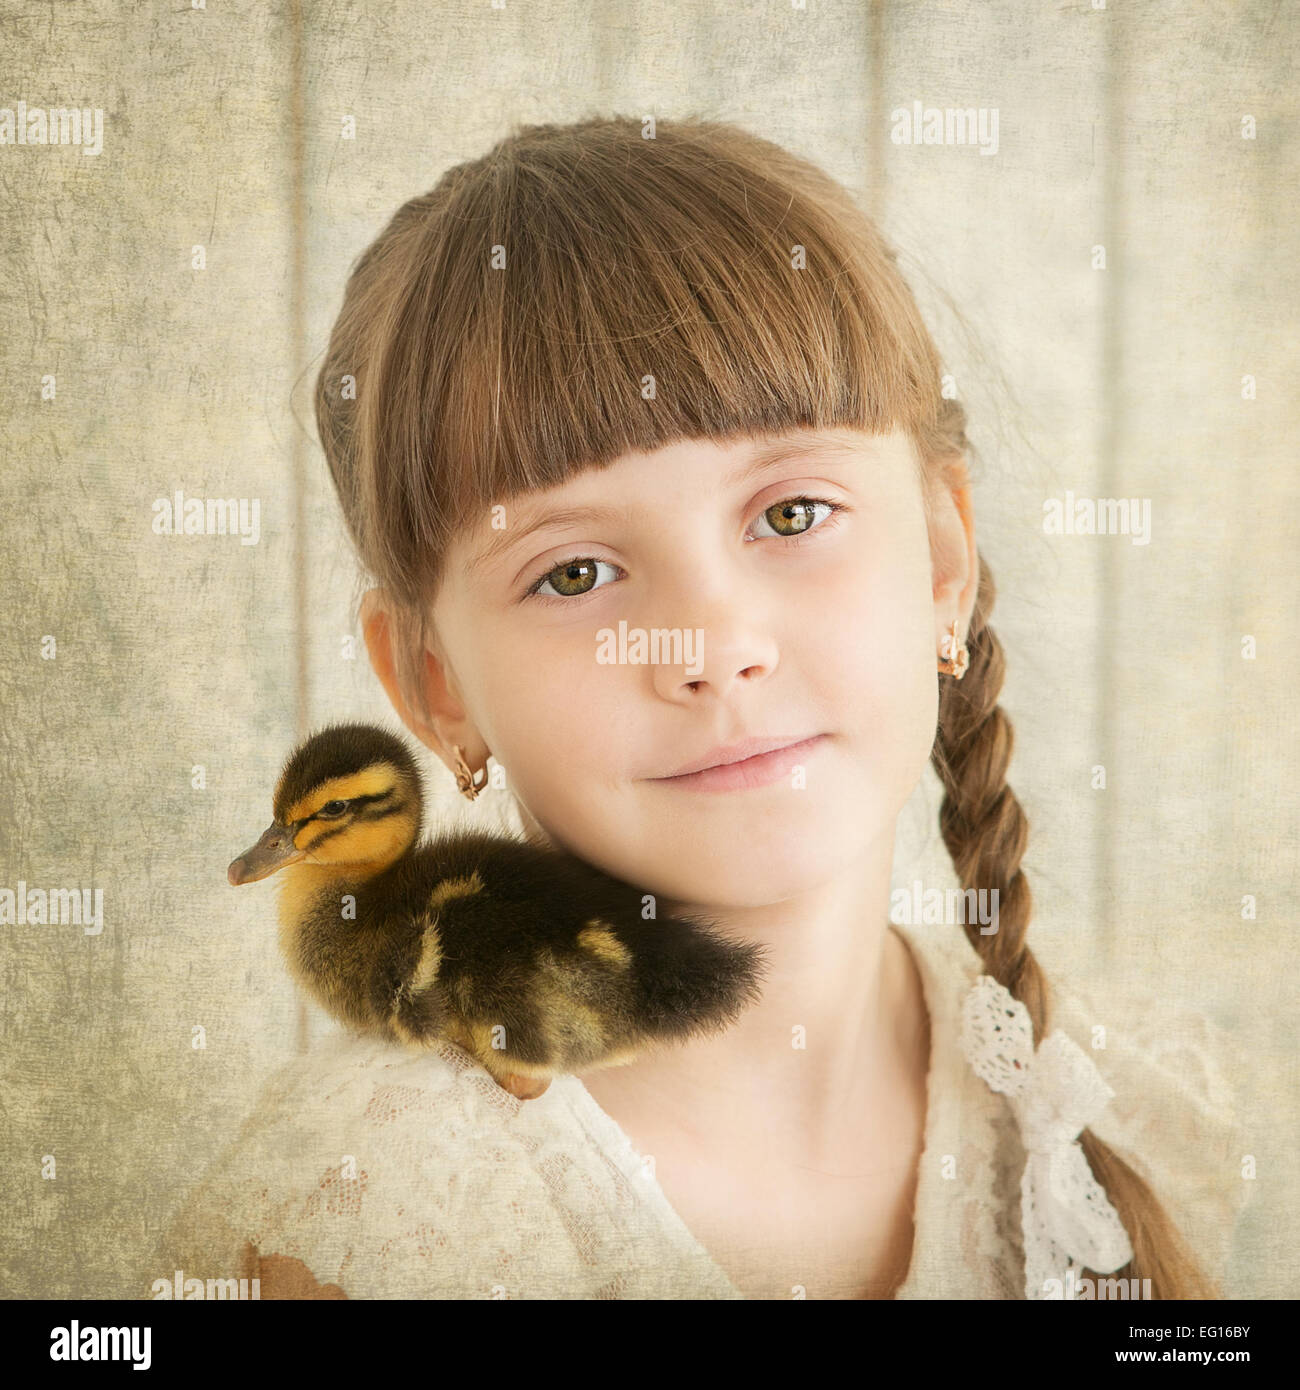 portrait of girl with duckling on shoulder Stock Photo